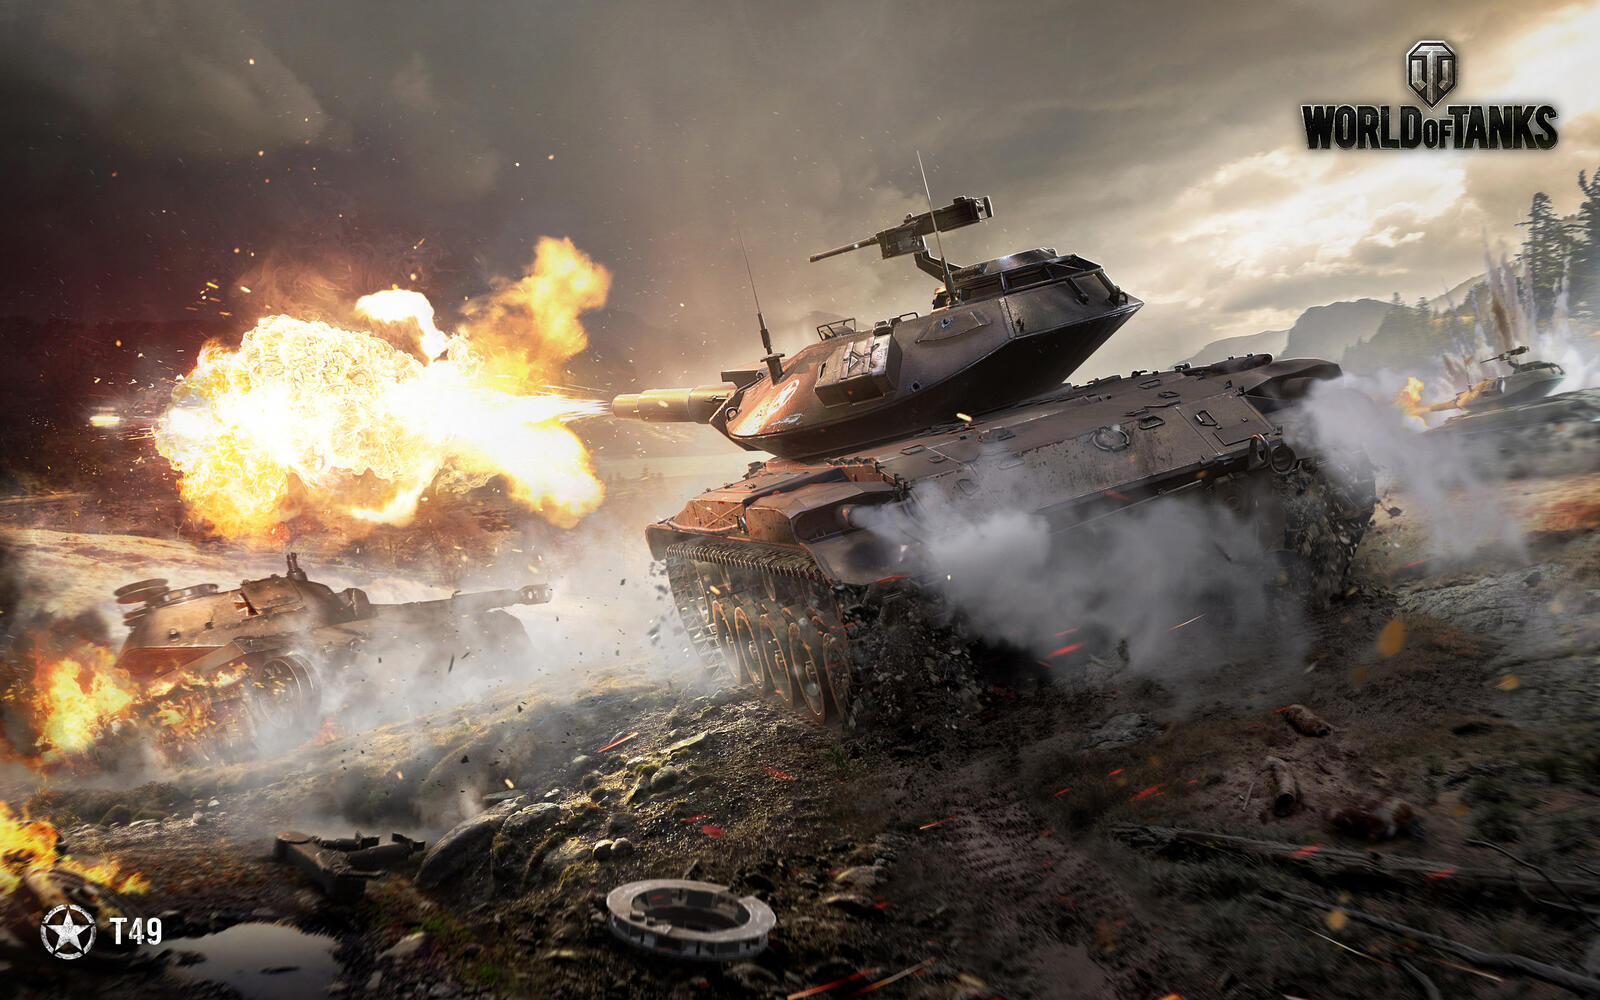 Free photo Screensaver with the image of a light tank from the game World of Tanks